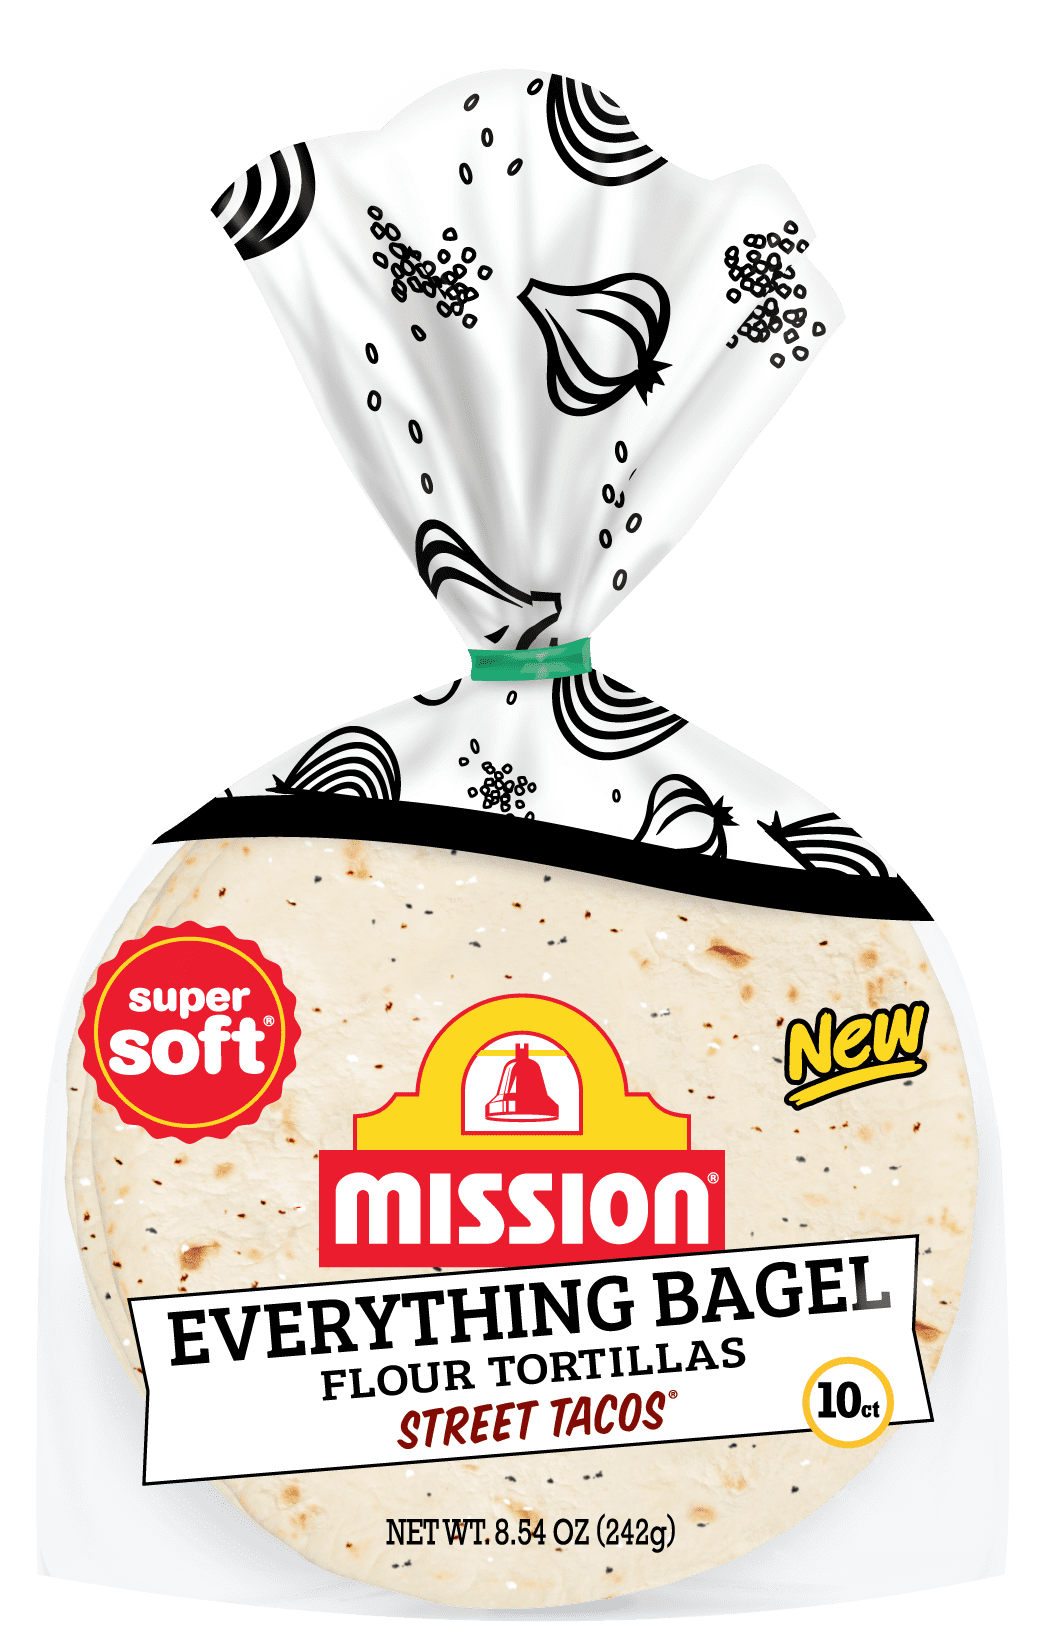 Mission Everything Bagel Street Tacos, 10 Count